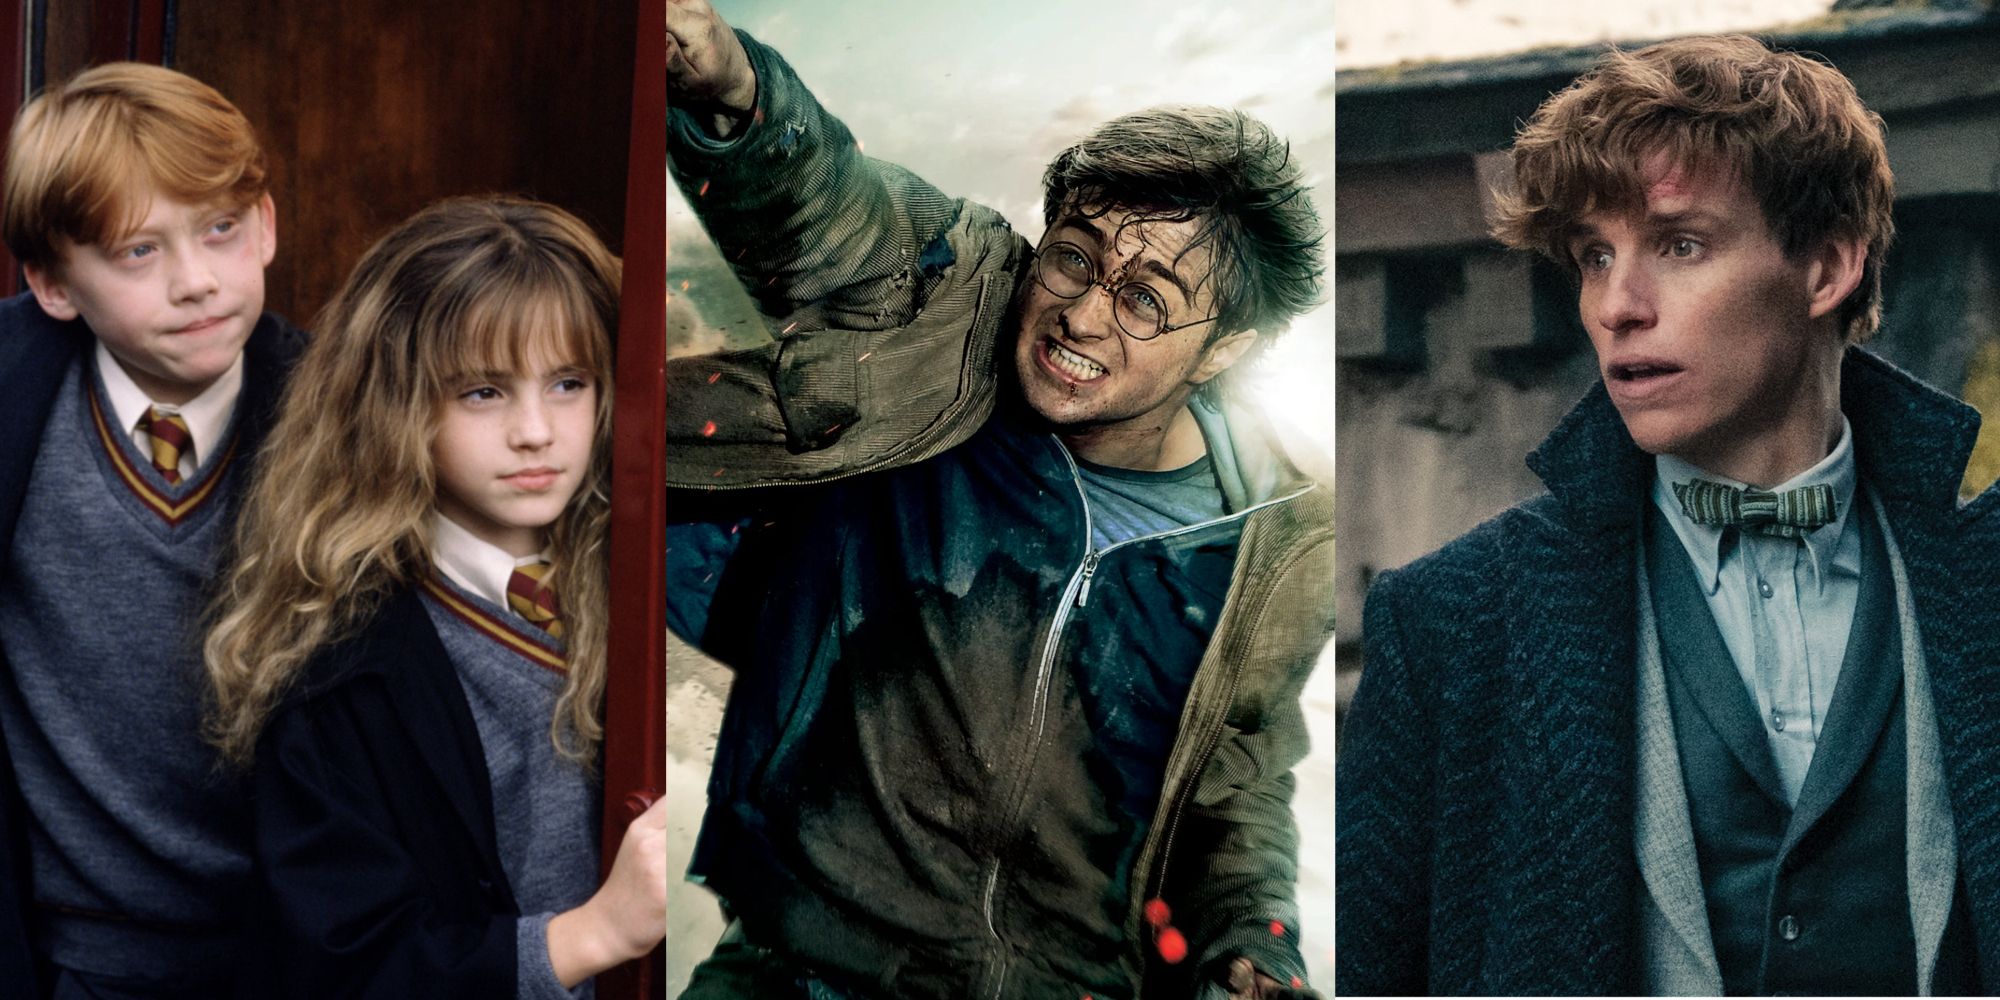 The Harry Potter Film Series TV Show: Watch All Seasons, Full